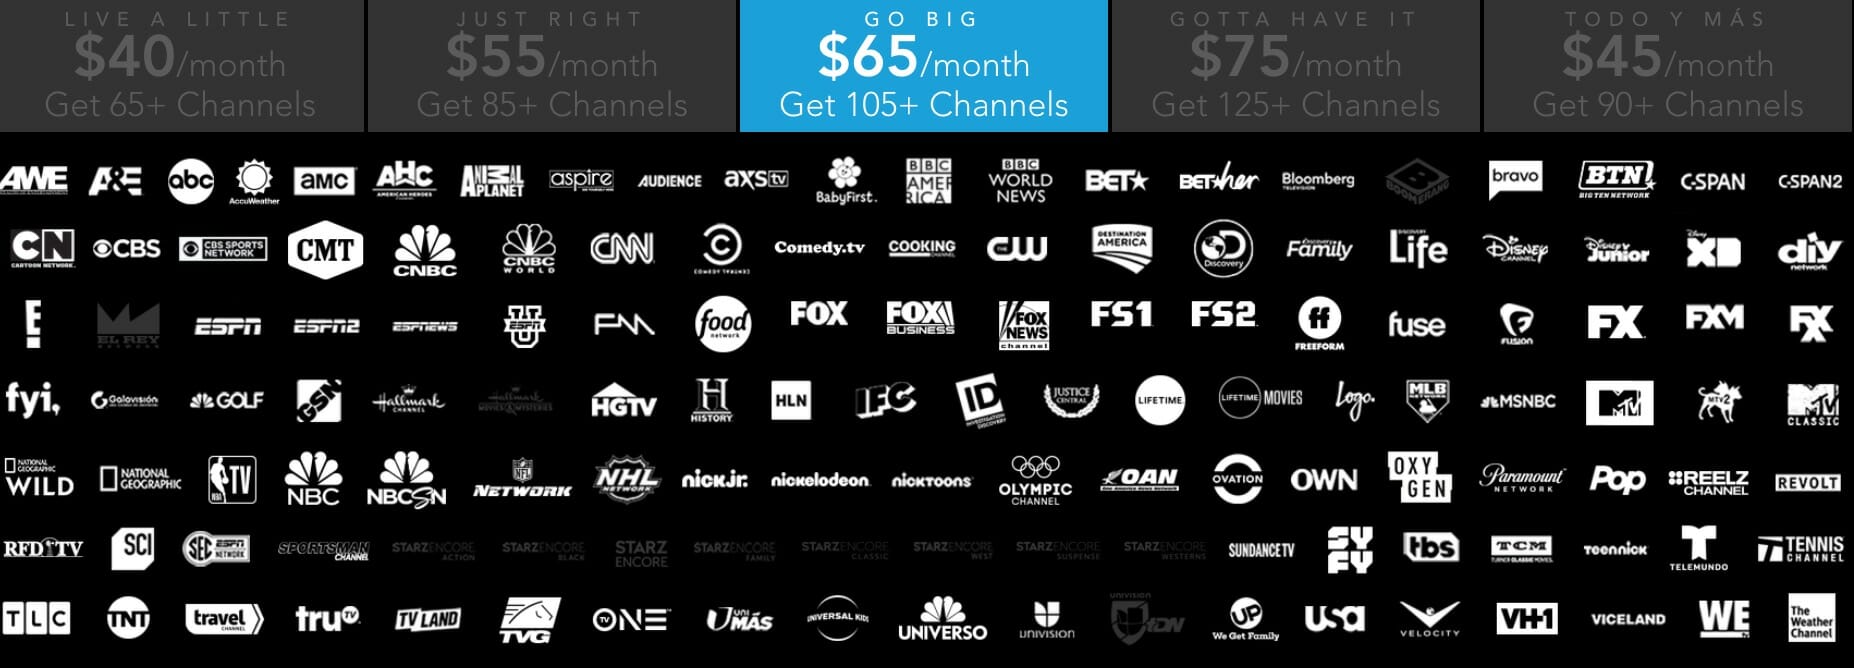 direct tv channel list for streaming